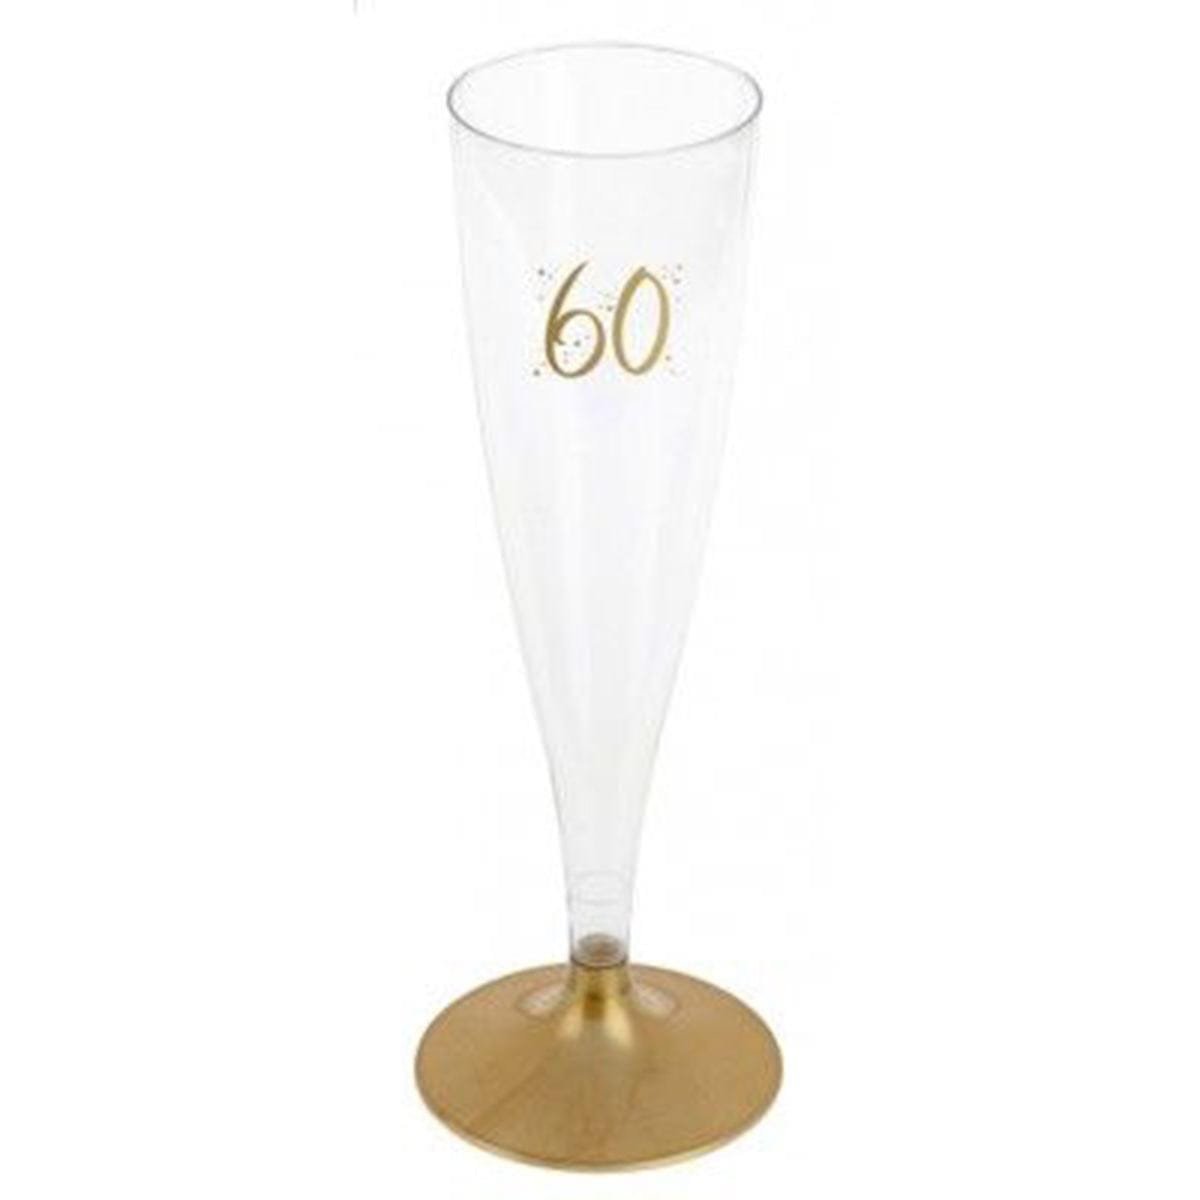 SANTEX Age Specific Birthday 60th Birthday Champagne Flute, Gold, 6 Count